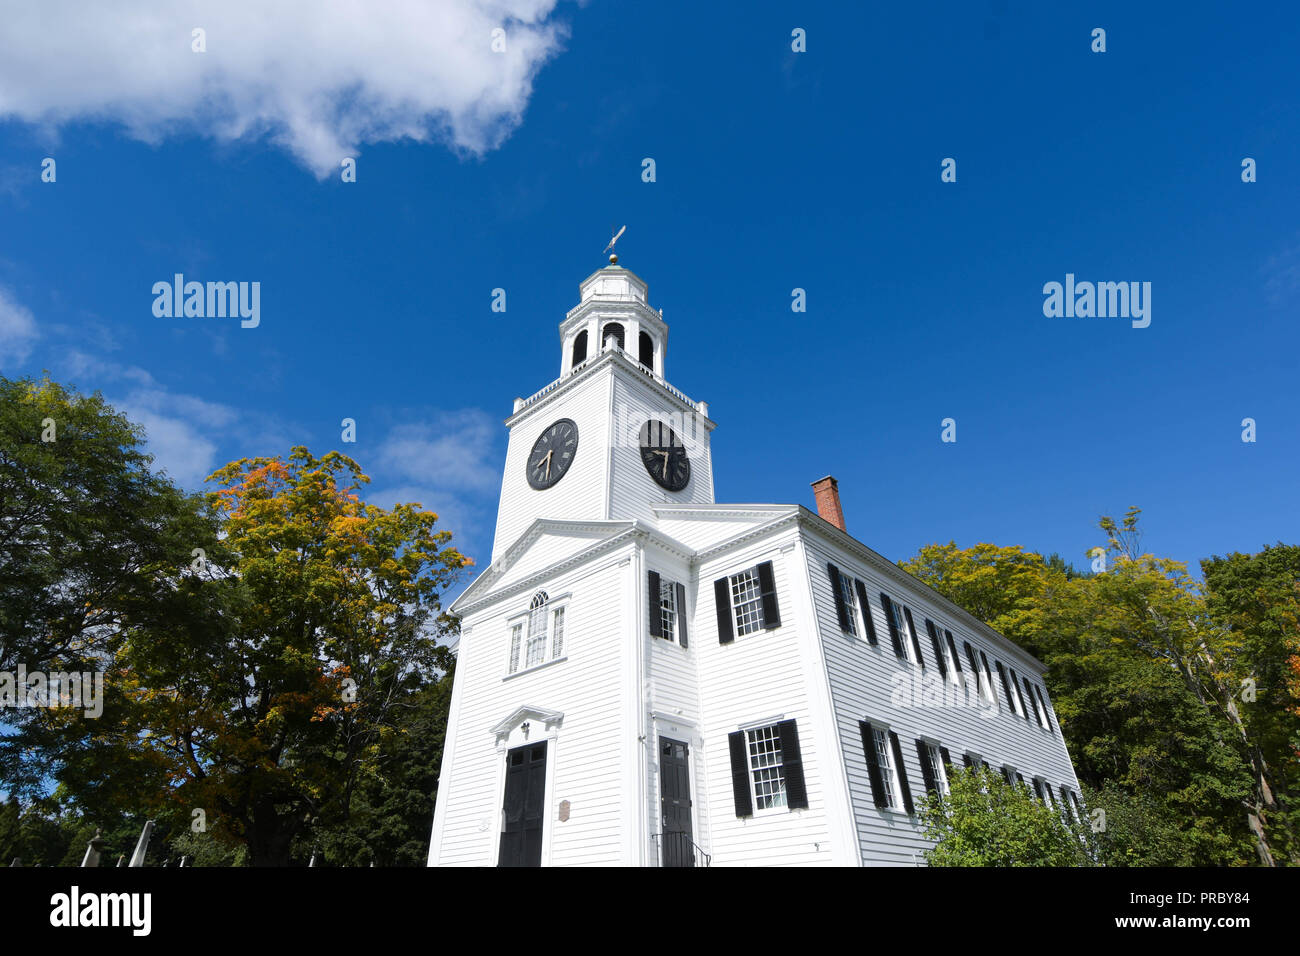 The Church on the Hill, a Congregational church built in 1805 in Lenox, Massachusetts, in early autumn Stock Photo